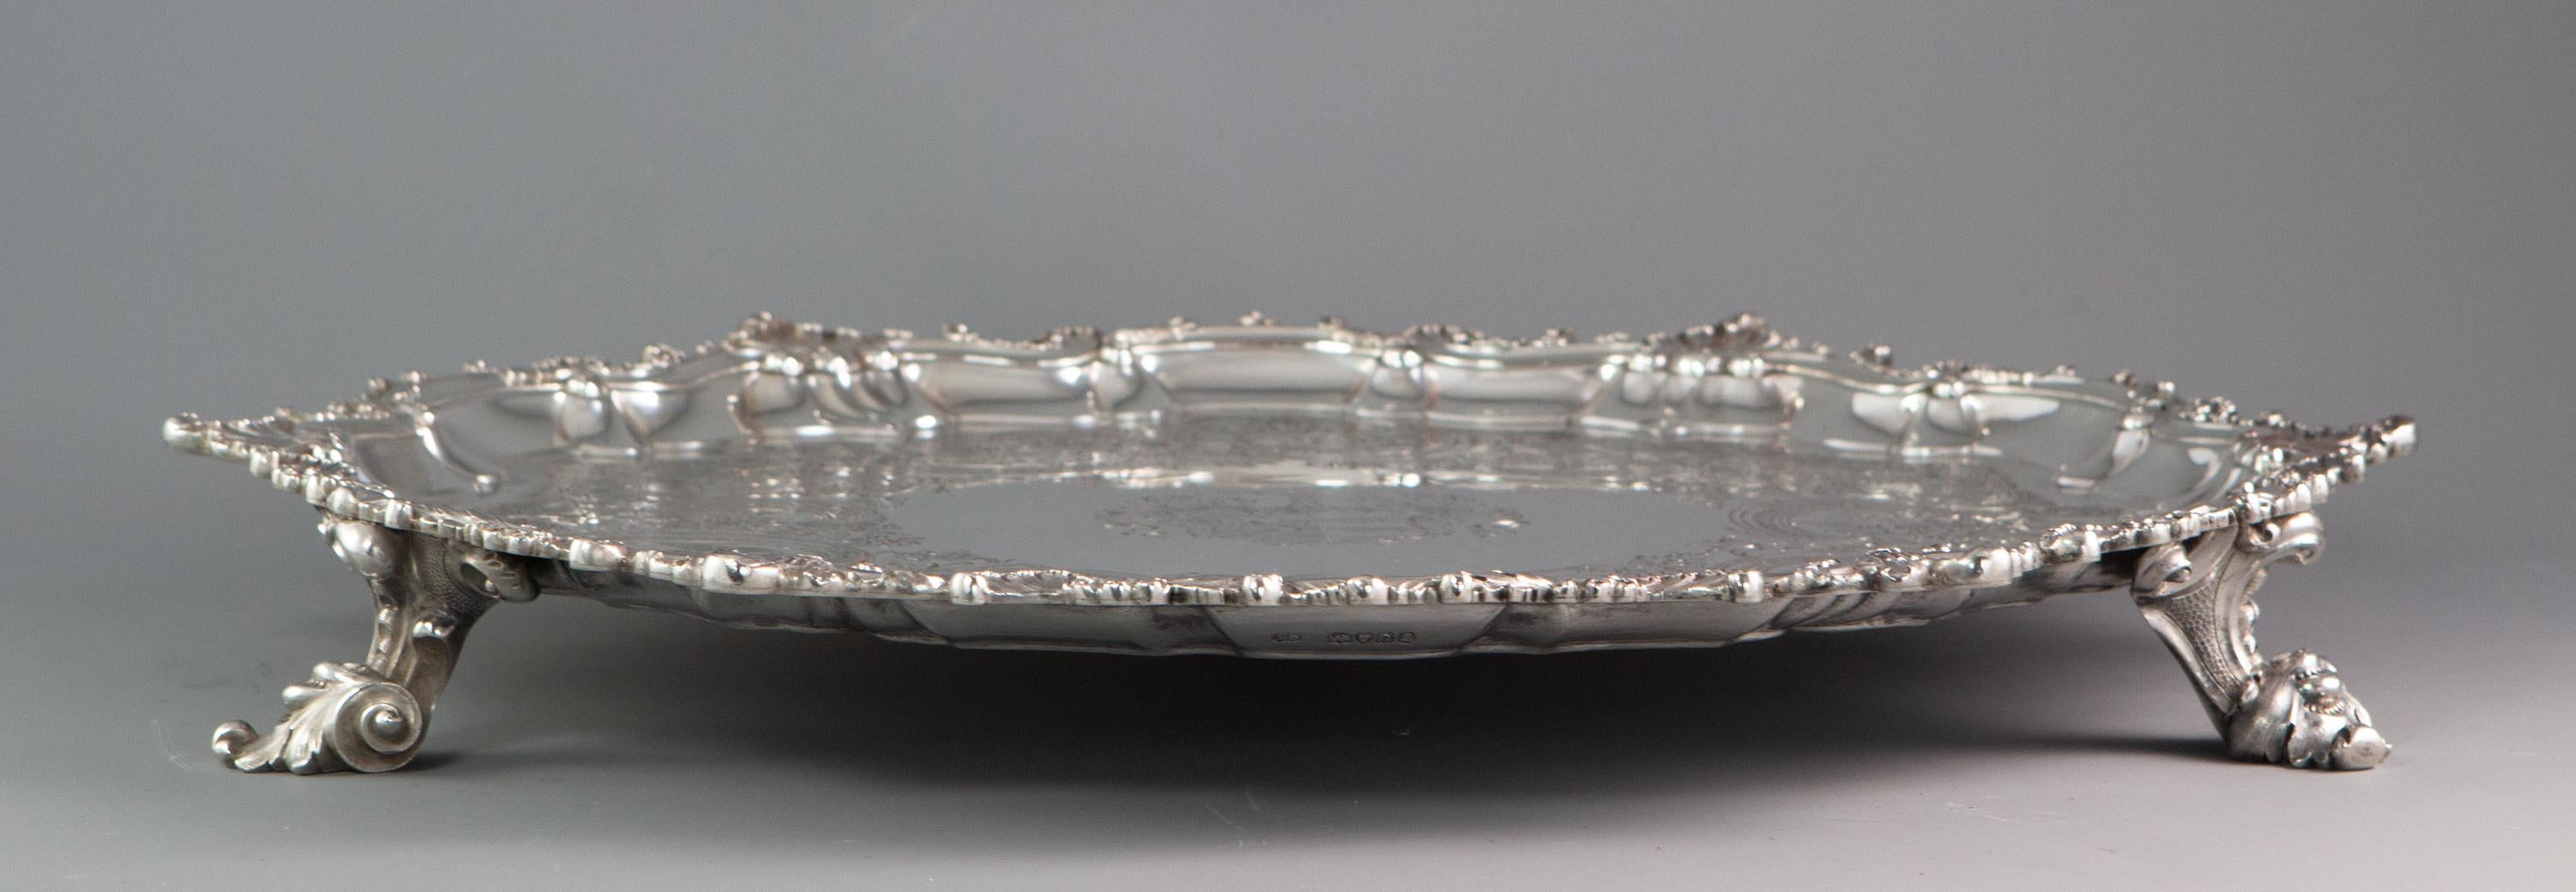 Large Georgian Silver Salver or Tray by Paul Storr, London, 1829 3